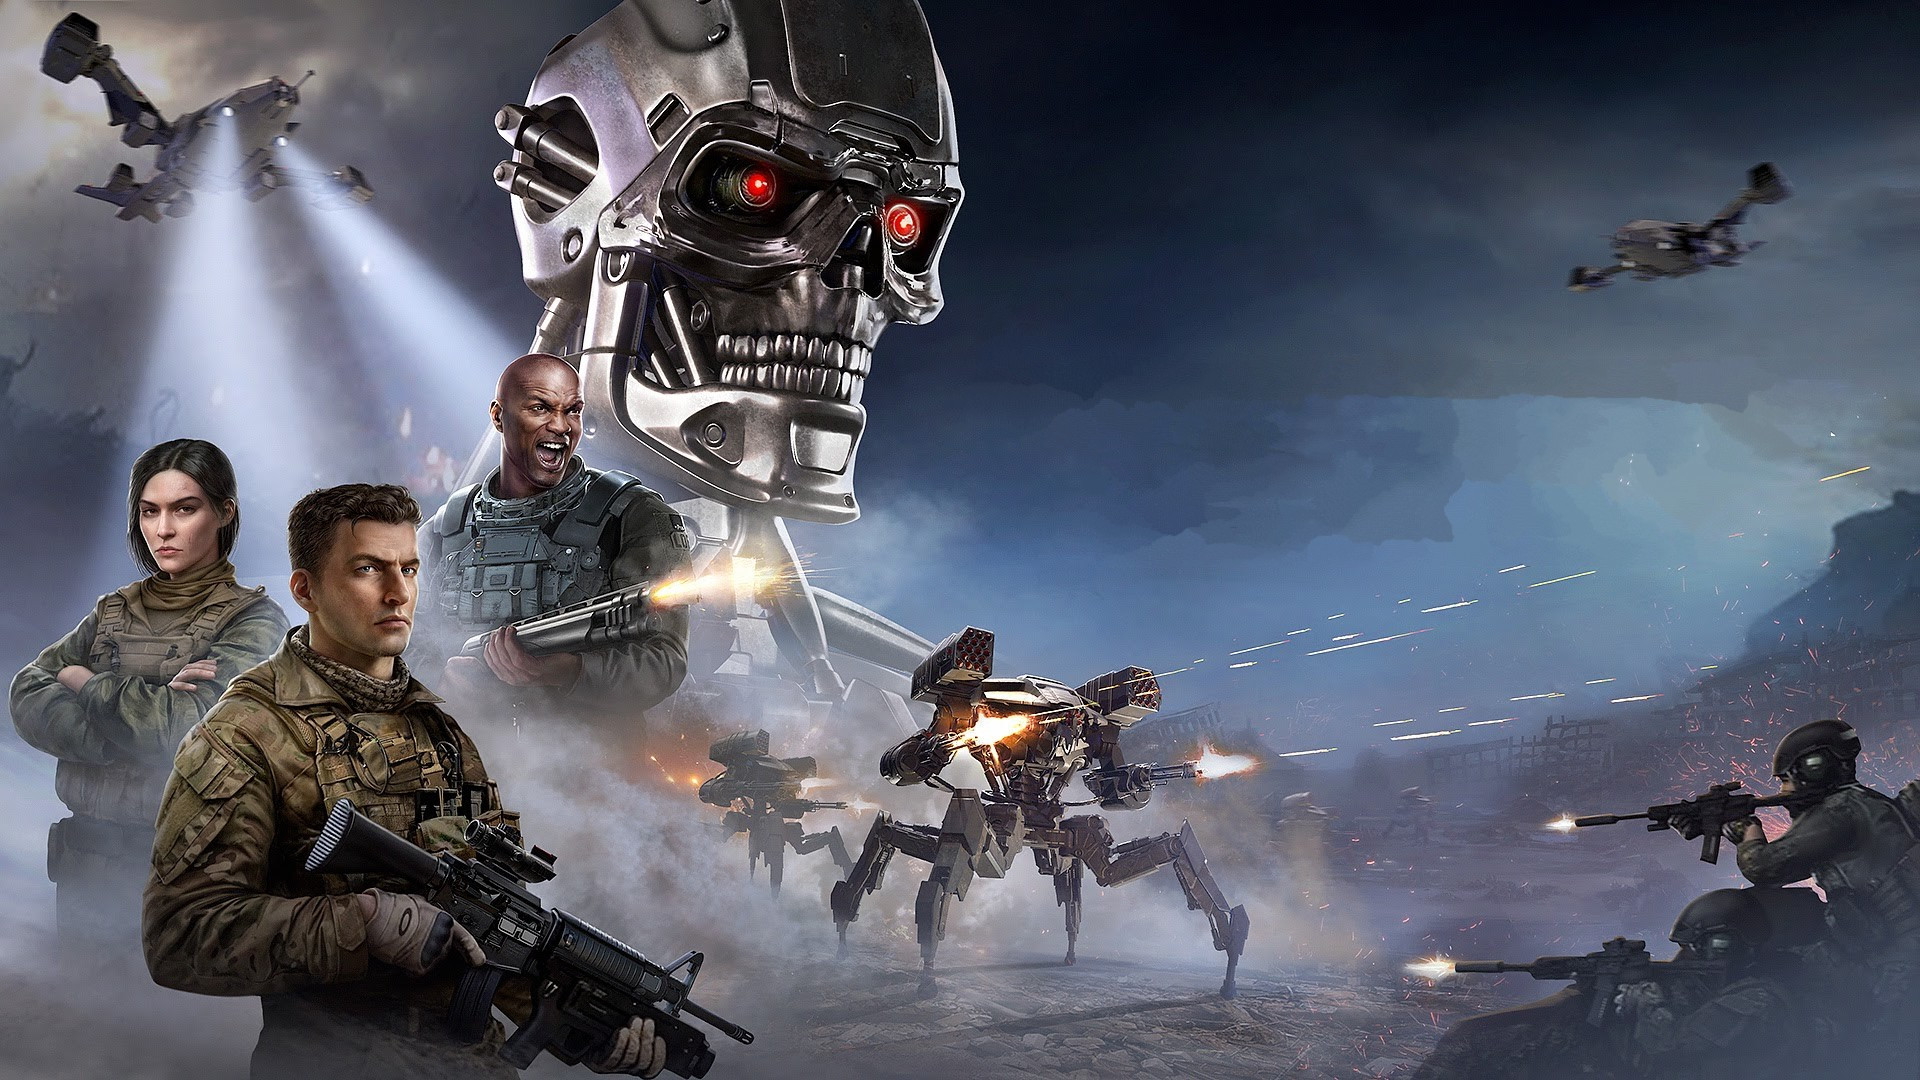 Terminator: Dark Fate – Defiance launches later this year